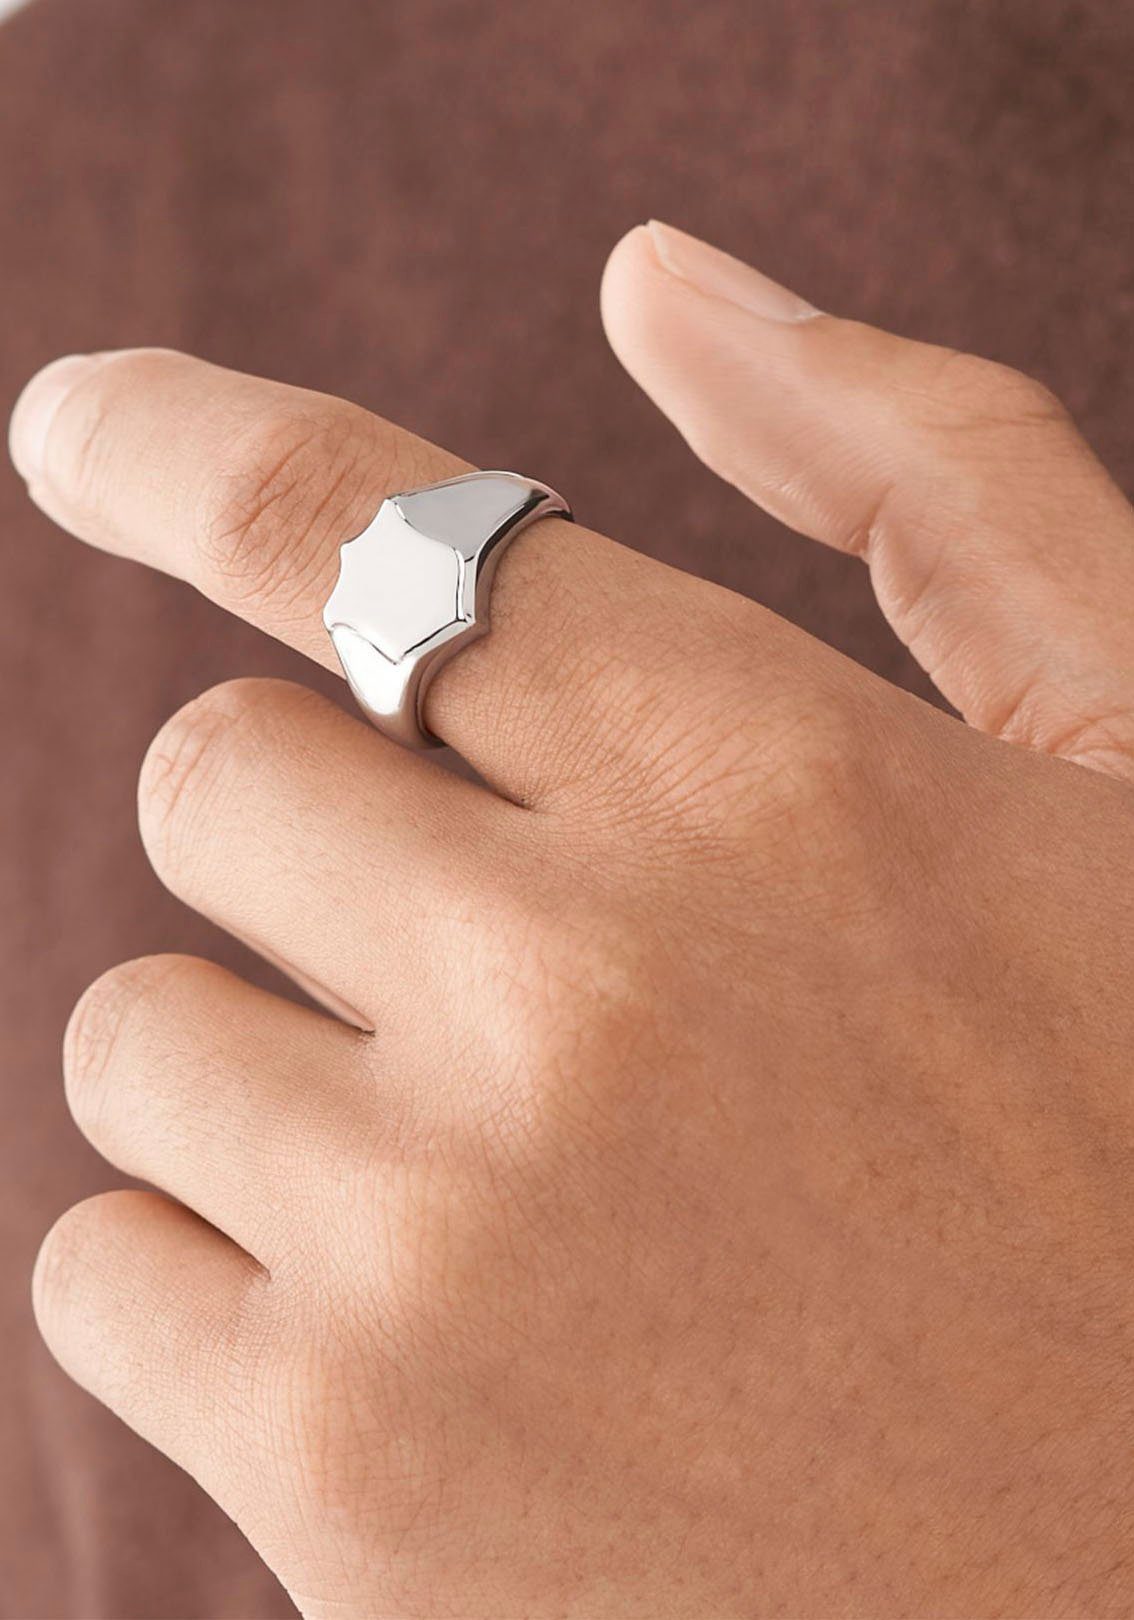 HERITAGE, Fossil JF04347040 Fingerring